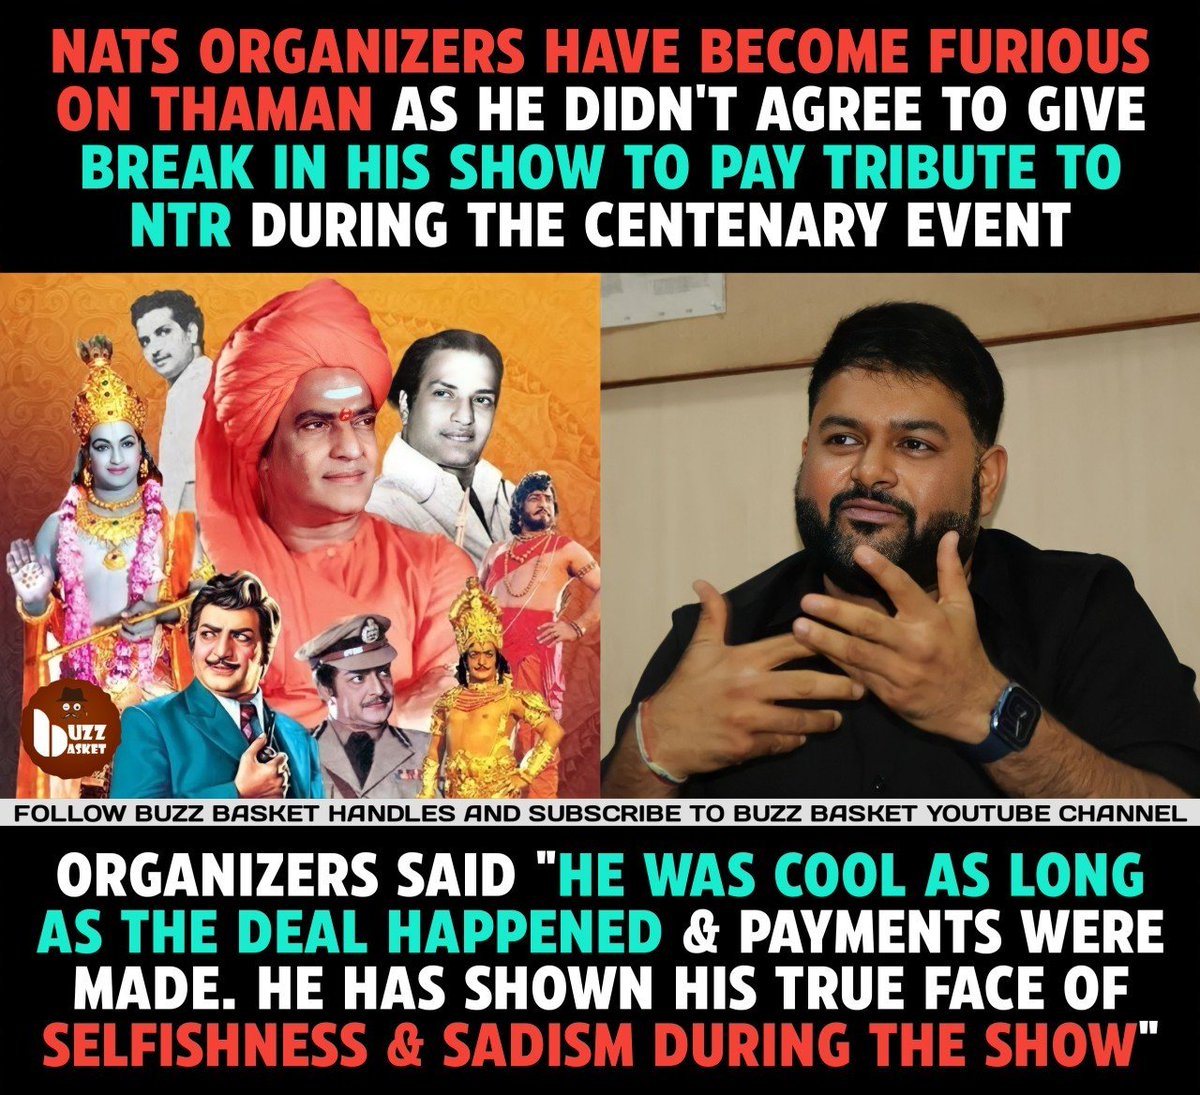 #Thaman did not agree to give break in his show to pay tribute to Legendary #NTR. 

#NTRCentenary #NATS #NorthAmerica #SrNTR